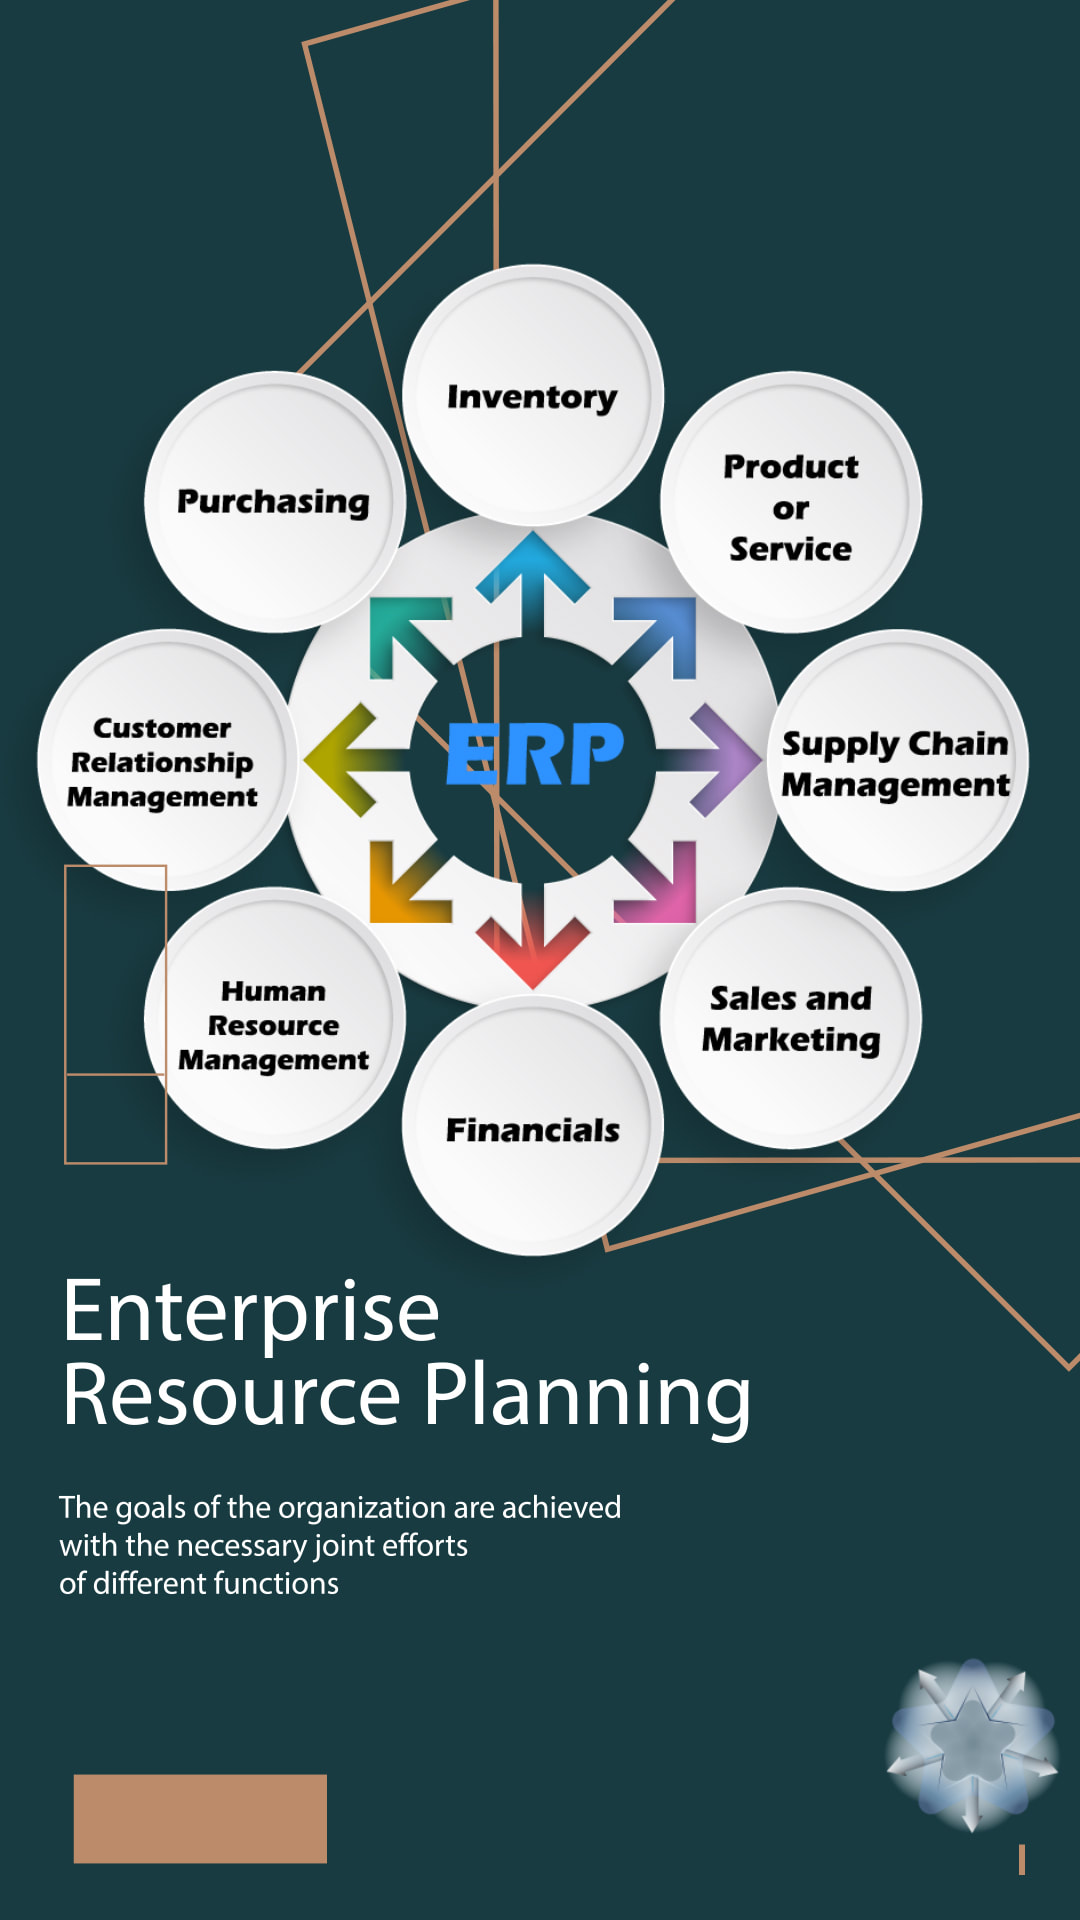 ERP inventory, supply chaing management